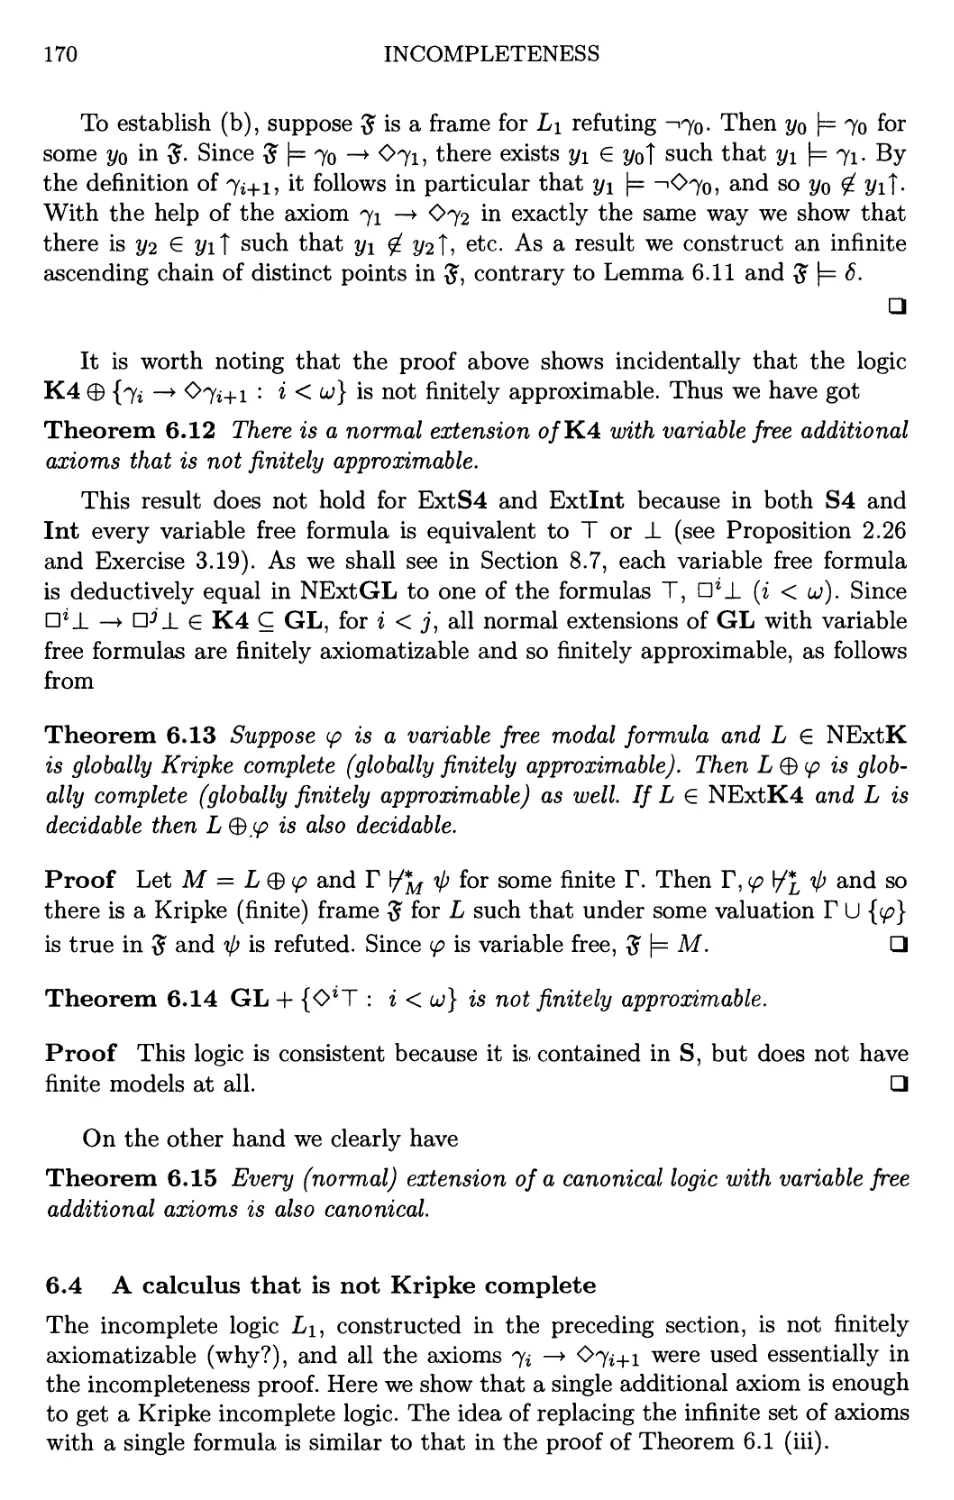 6.4 A calculus that is not Kripke complete